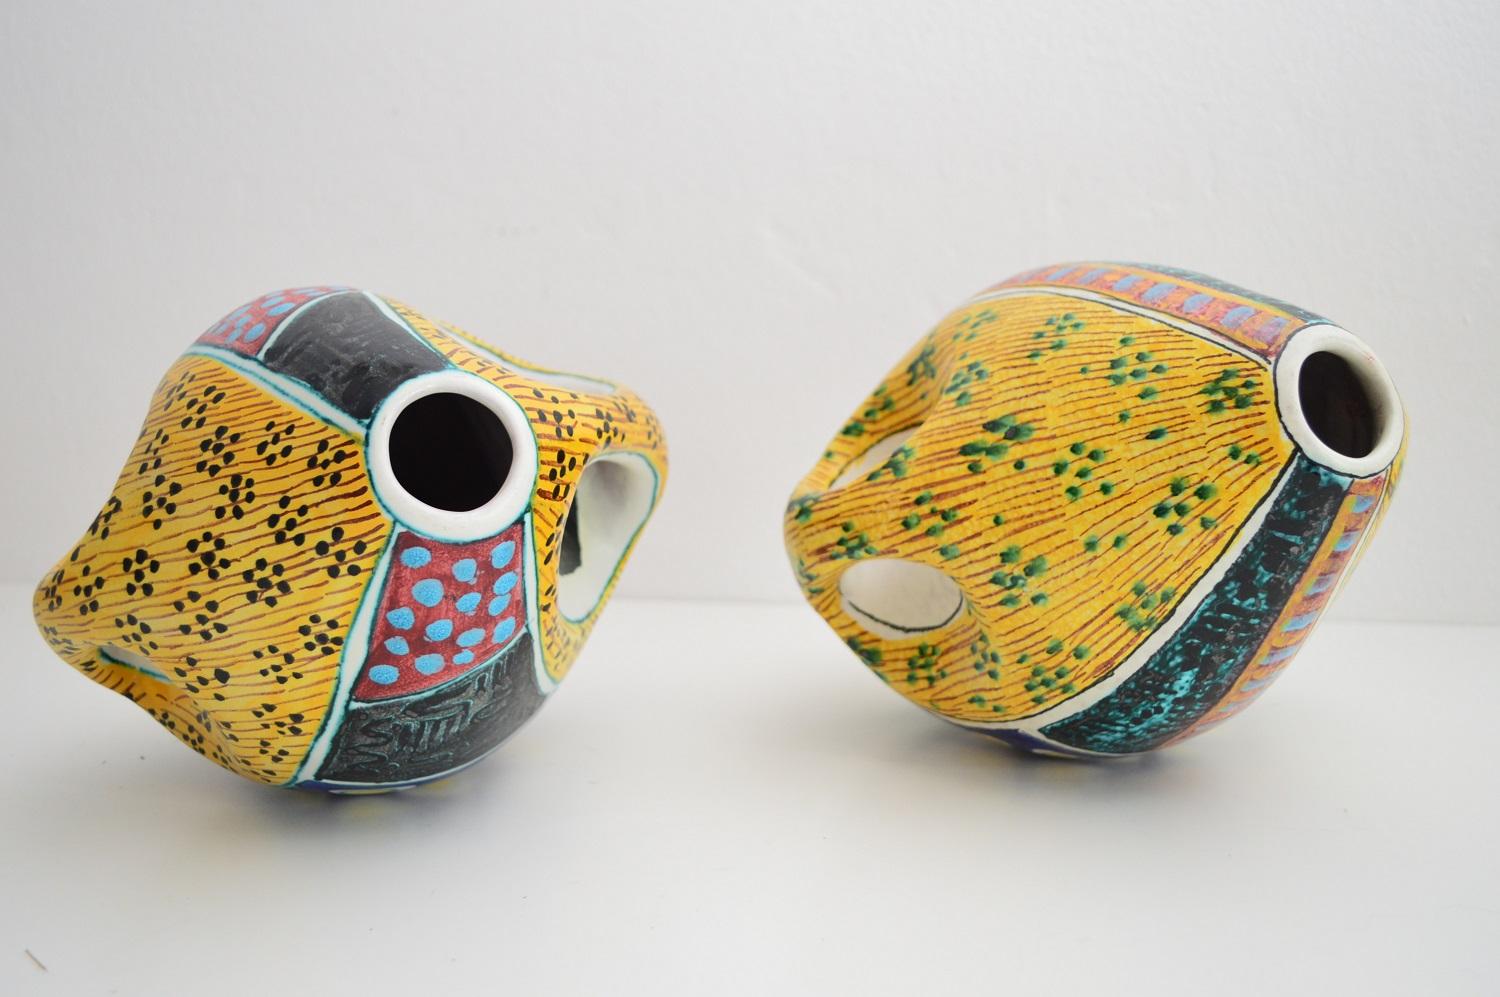 Italian Midcentury Ceramic Vases from Valceresio, 1950s, Set of Two For Sale 1